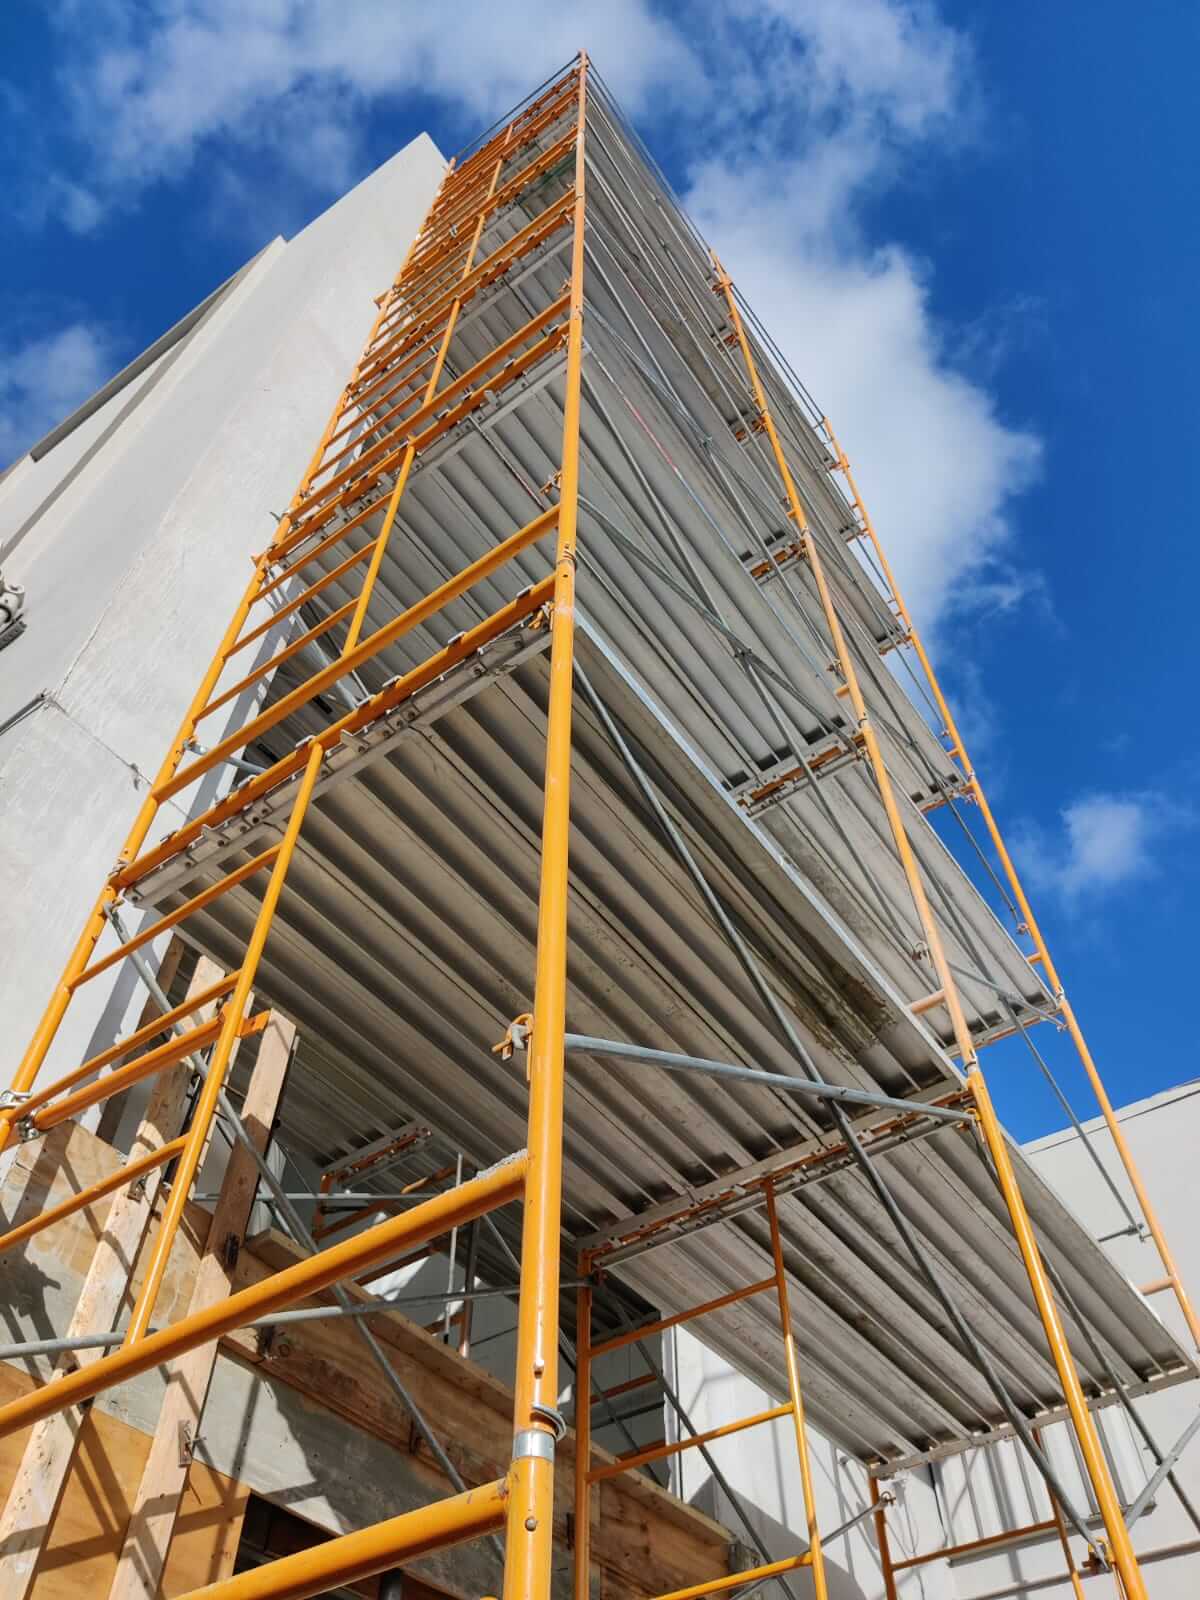 suspended scaffolding rental prices